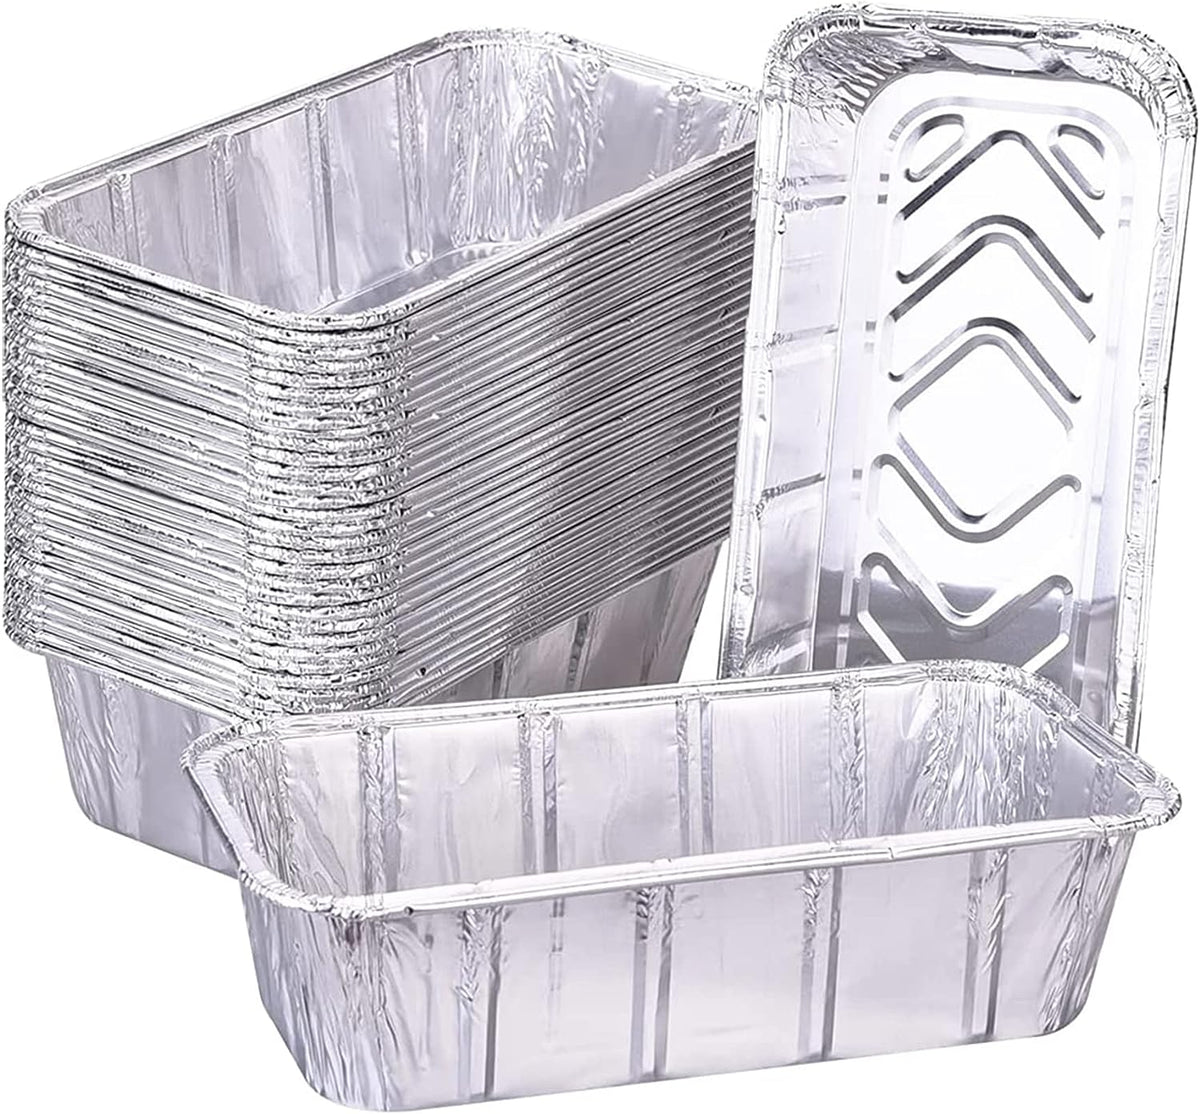 Aluminum Foil Grill Drip Pans -Bulk Pack of Durable Grill Trays Disposable BBQ Grease Pans Compatible with Made Also Great for Baking, Roasting 